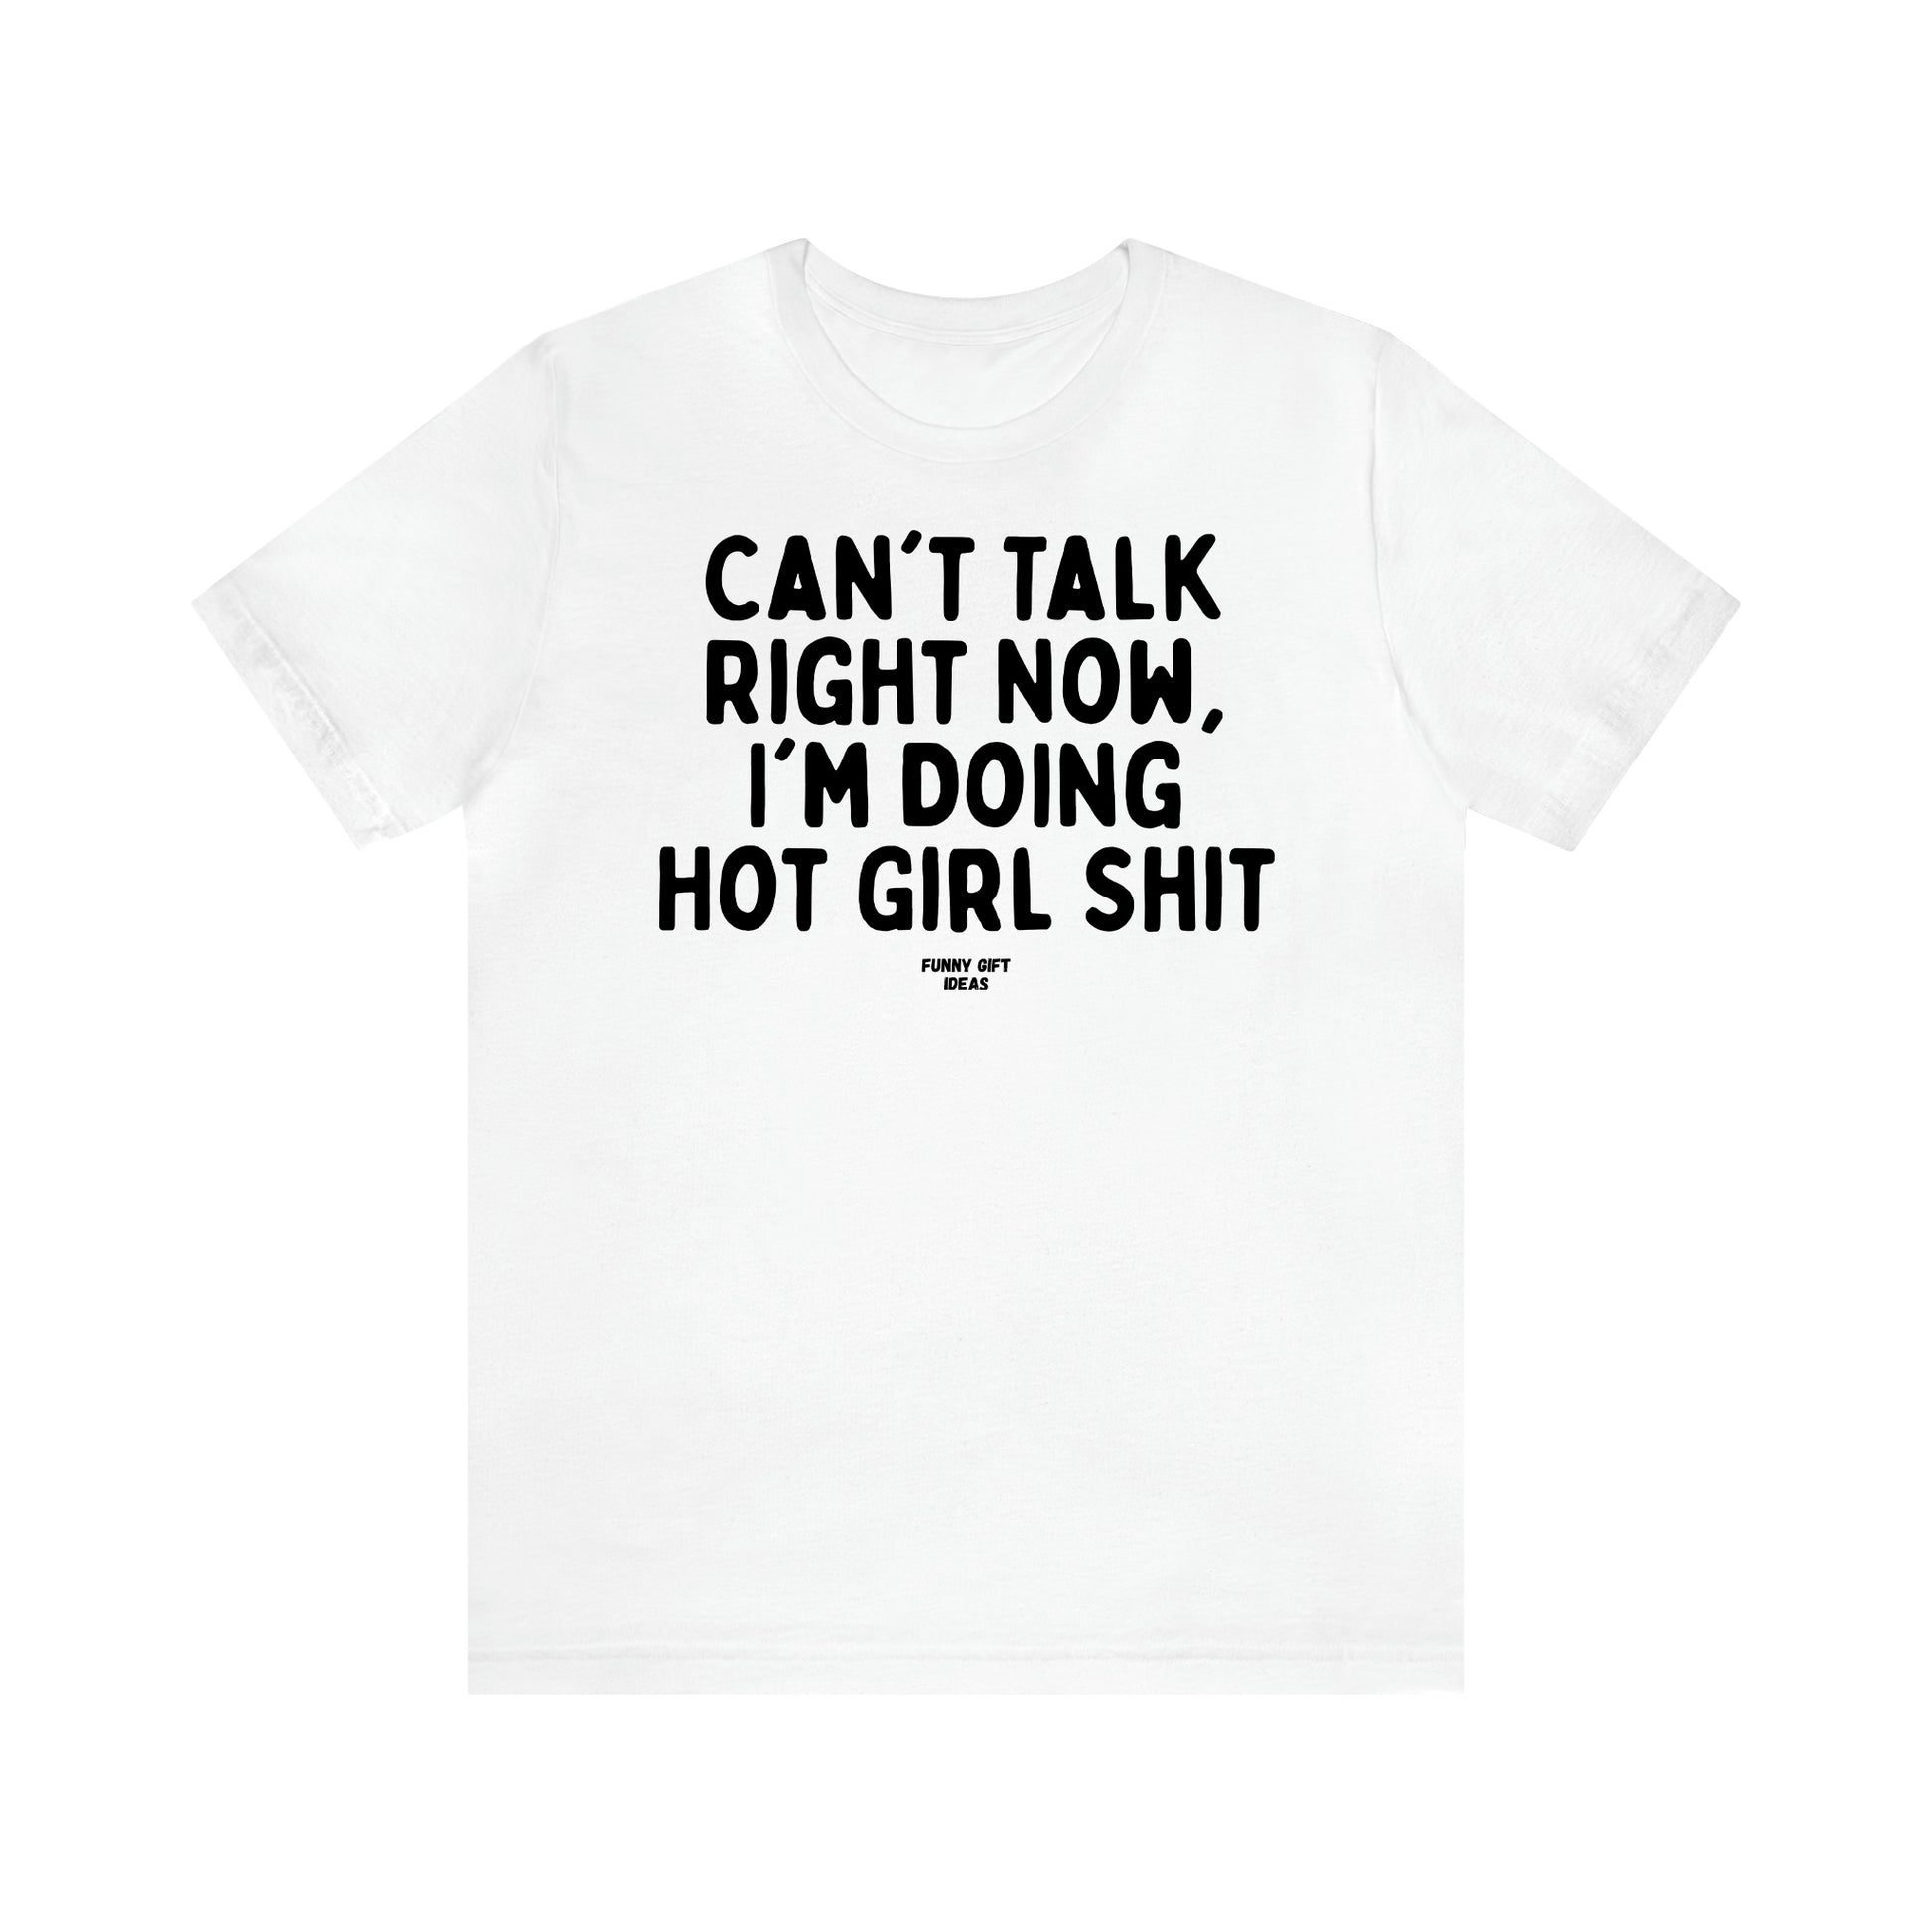 Women's T Shirts Can't Talk Right Now, I'm Doing Hot Girl Shit - Funny Gift Ideas